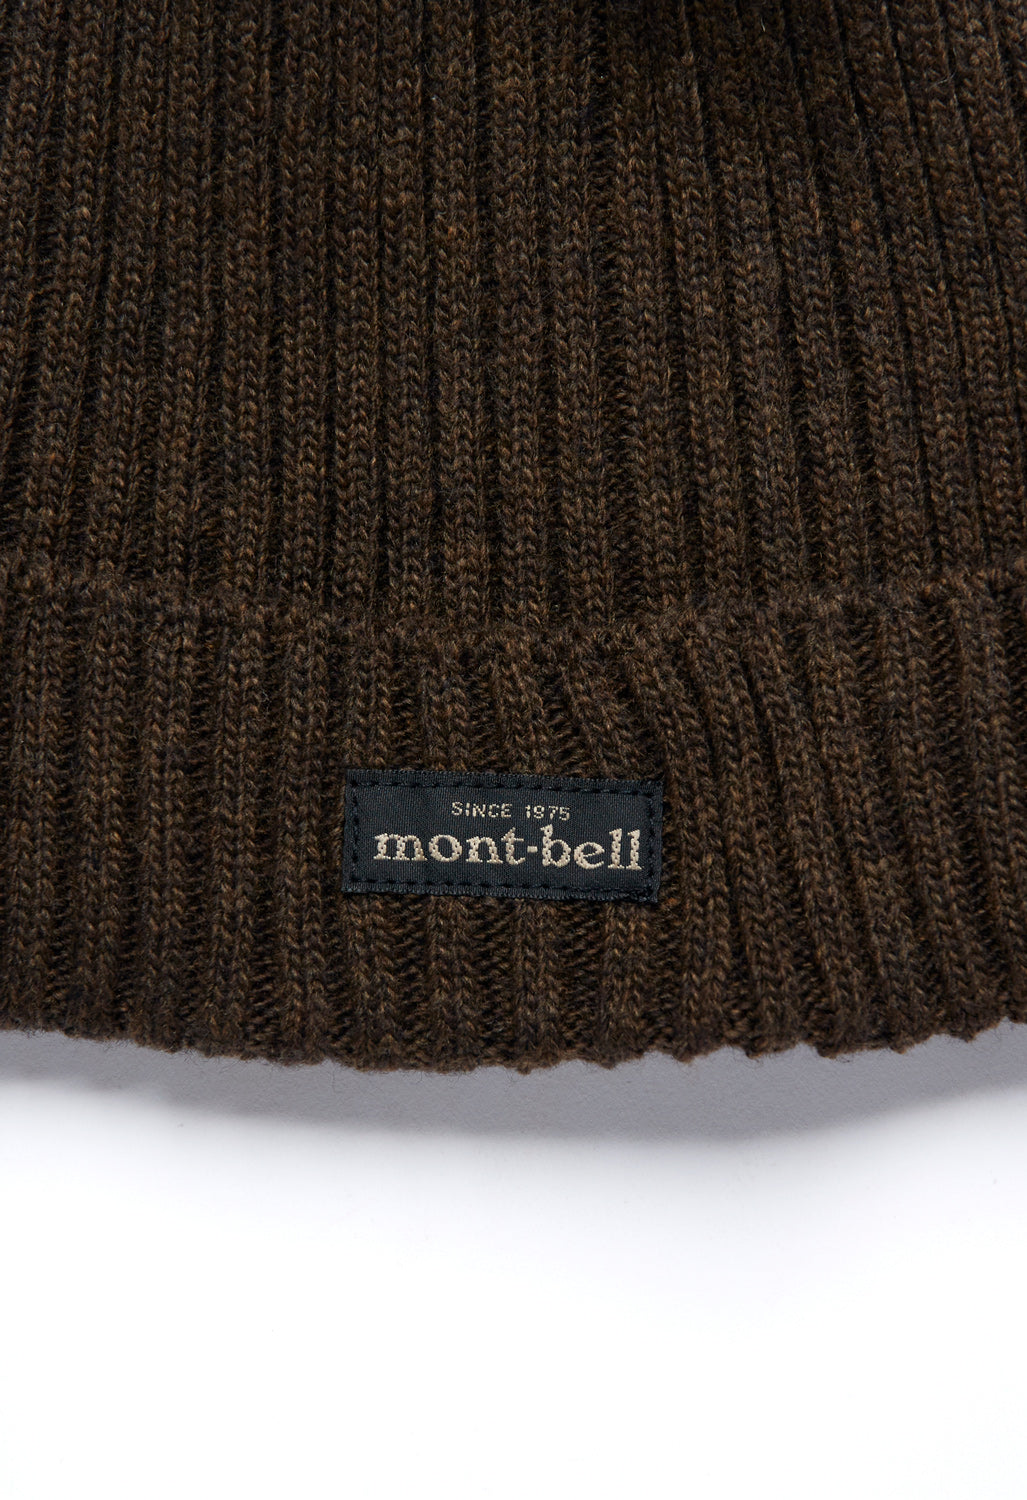 Montbell Light Rib Knit Watch Cap - Mix Brown